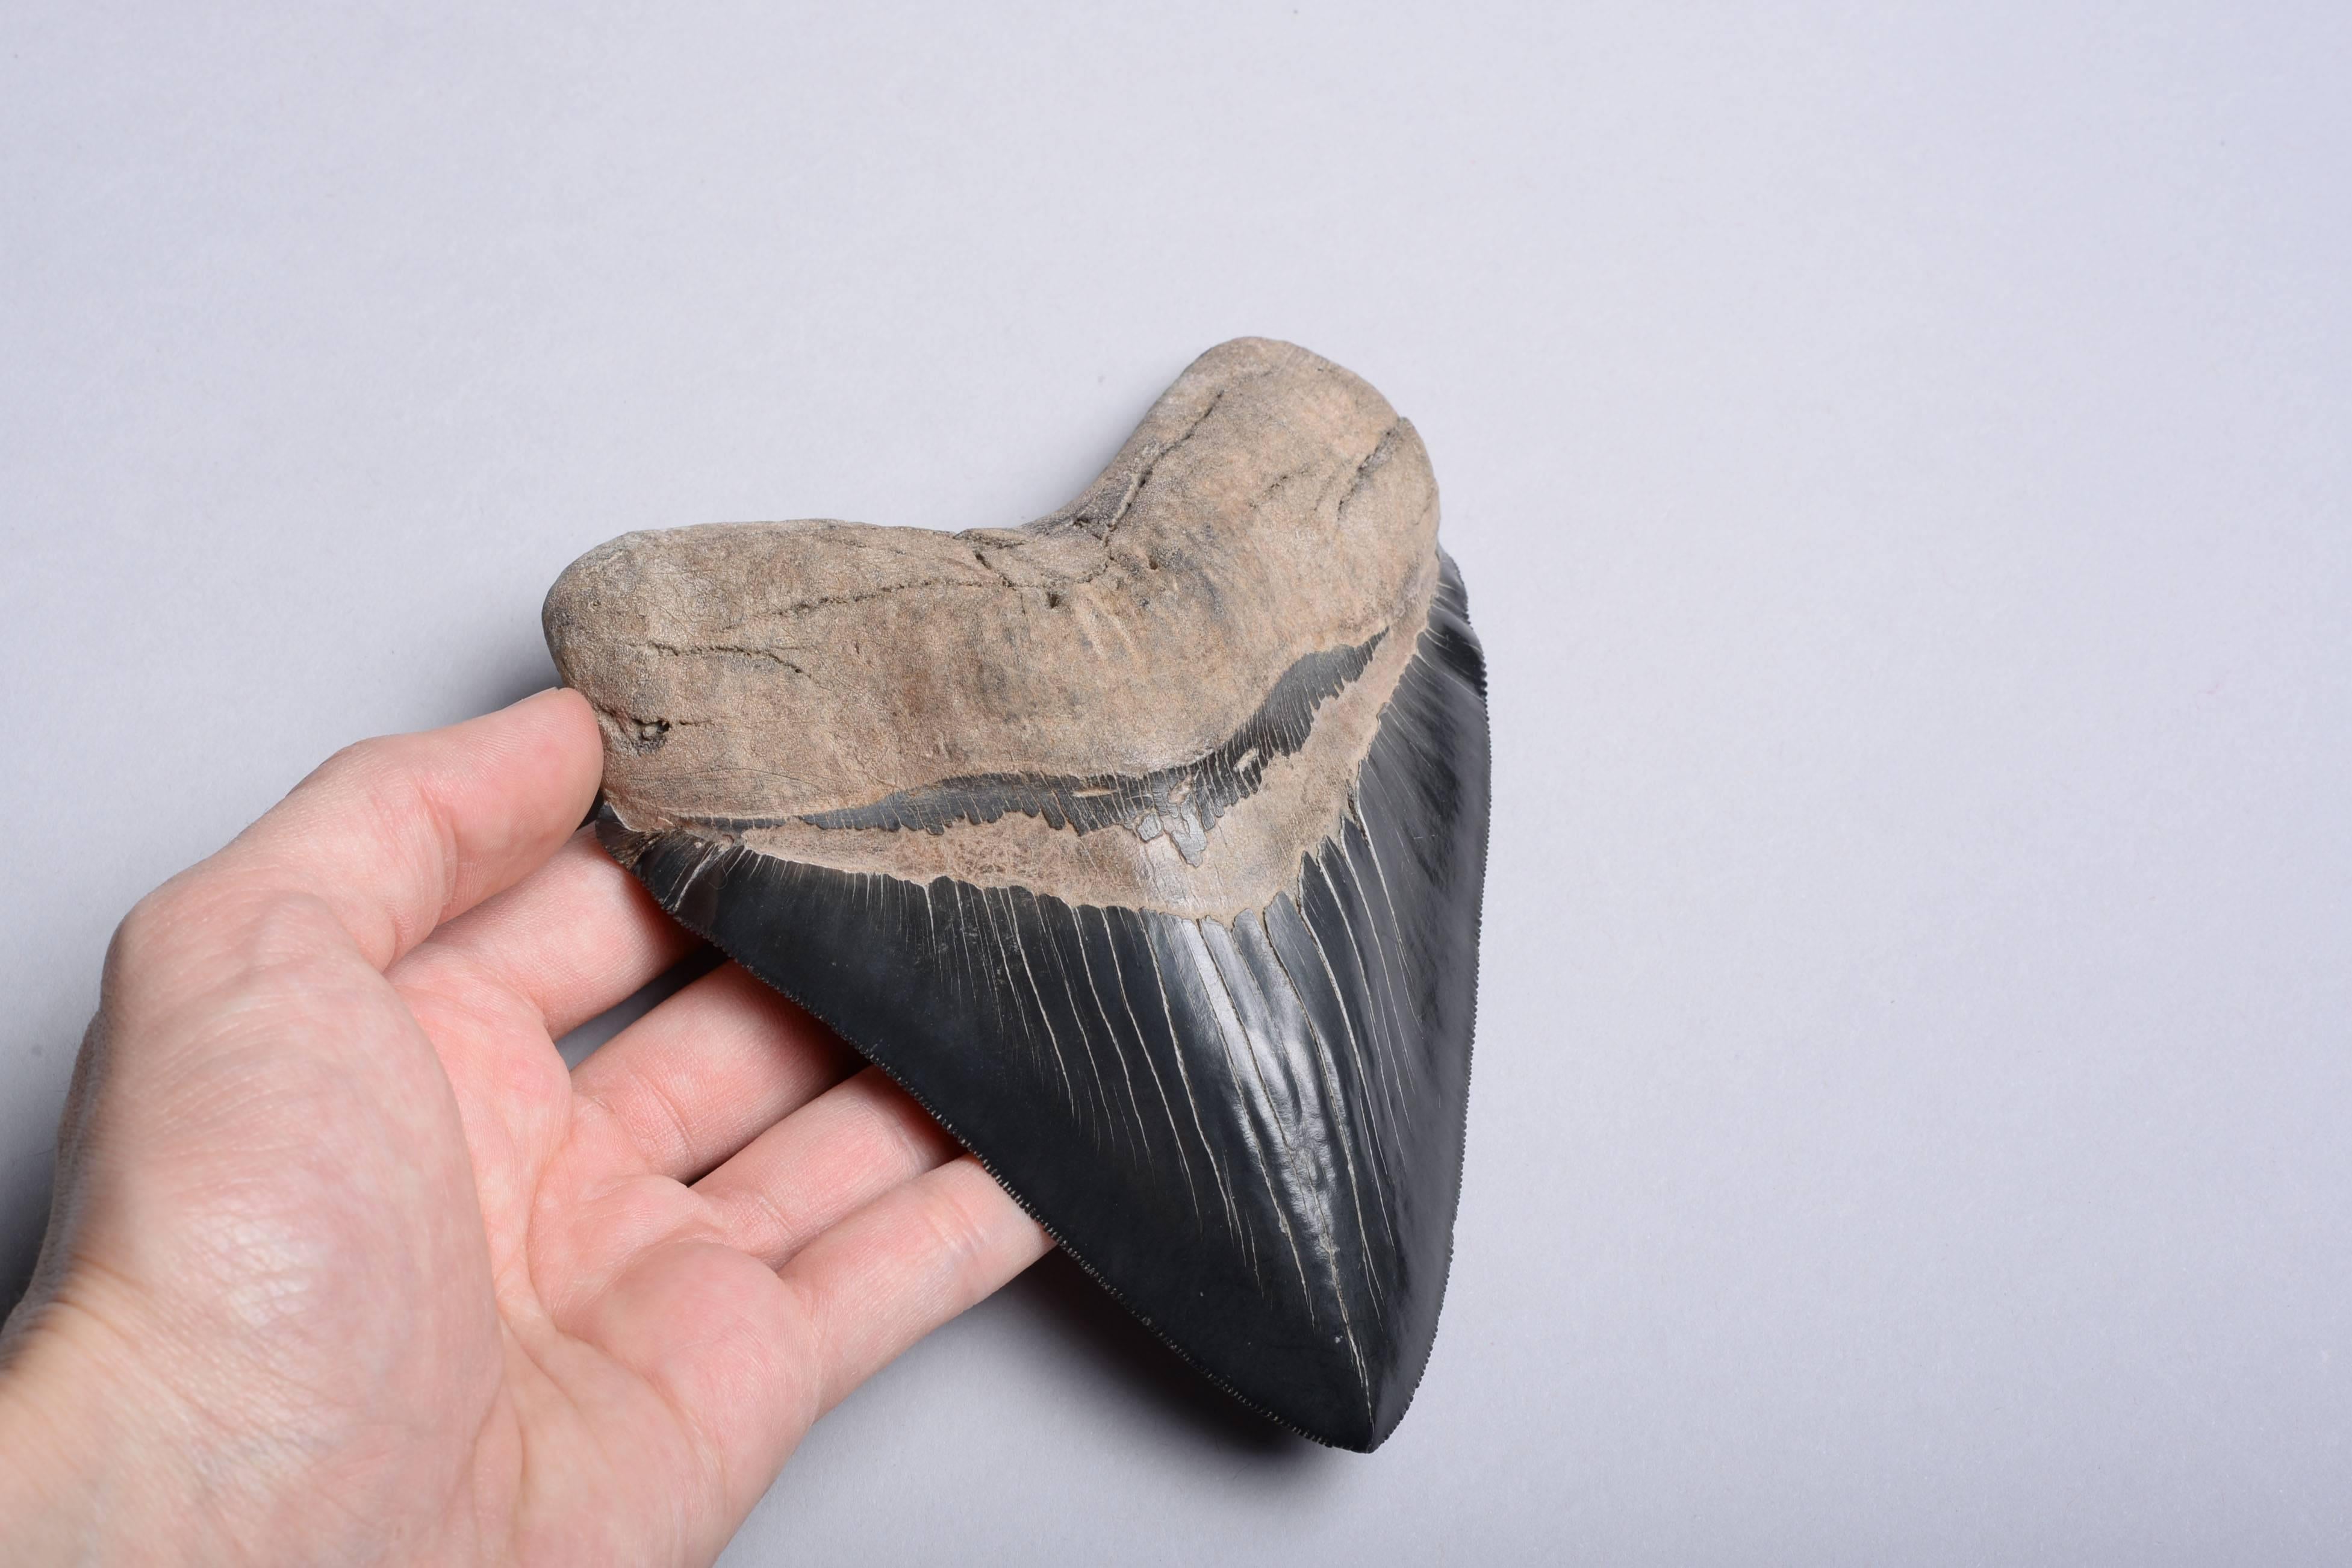 A large and perfectly preserved Megalodon (Carcharocles megalodon) shark tooth, dating to 25 – 2 million years before the present day. 

It's hard to comprehend that this enormous serrated tooth once belonged to a living creature. Yet this